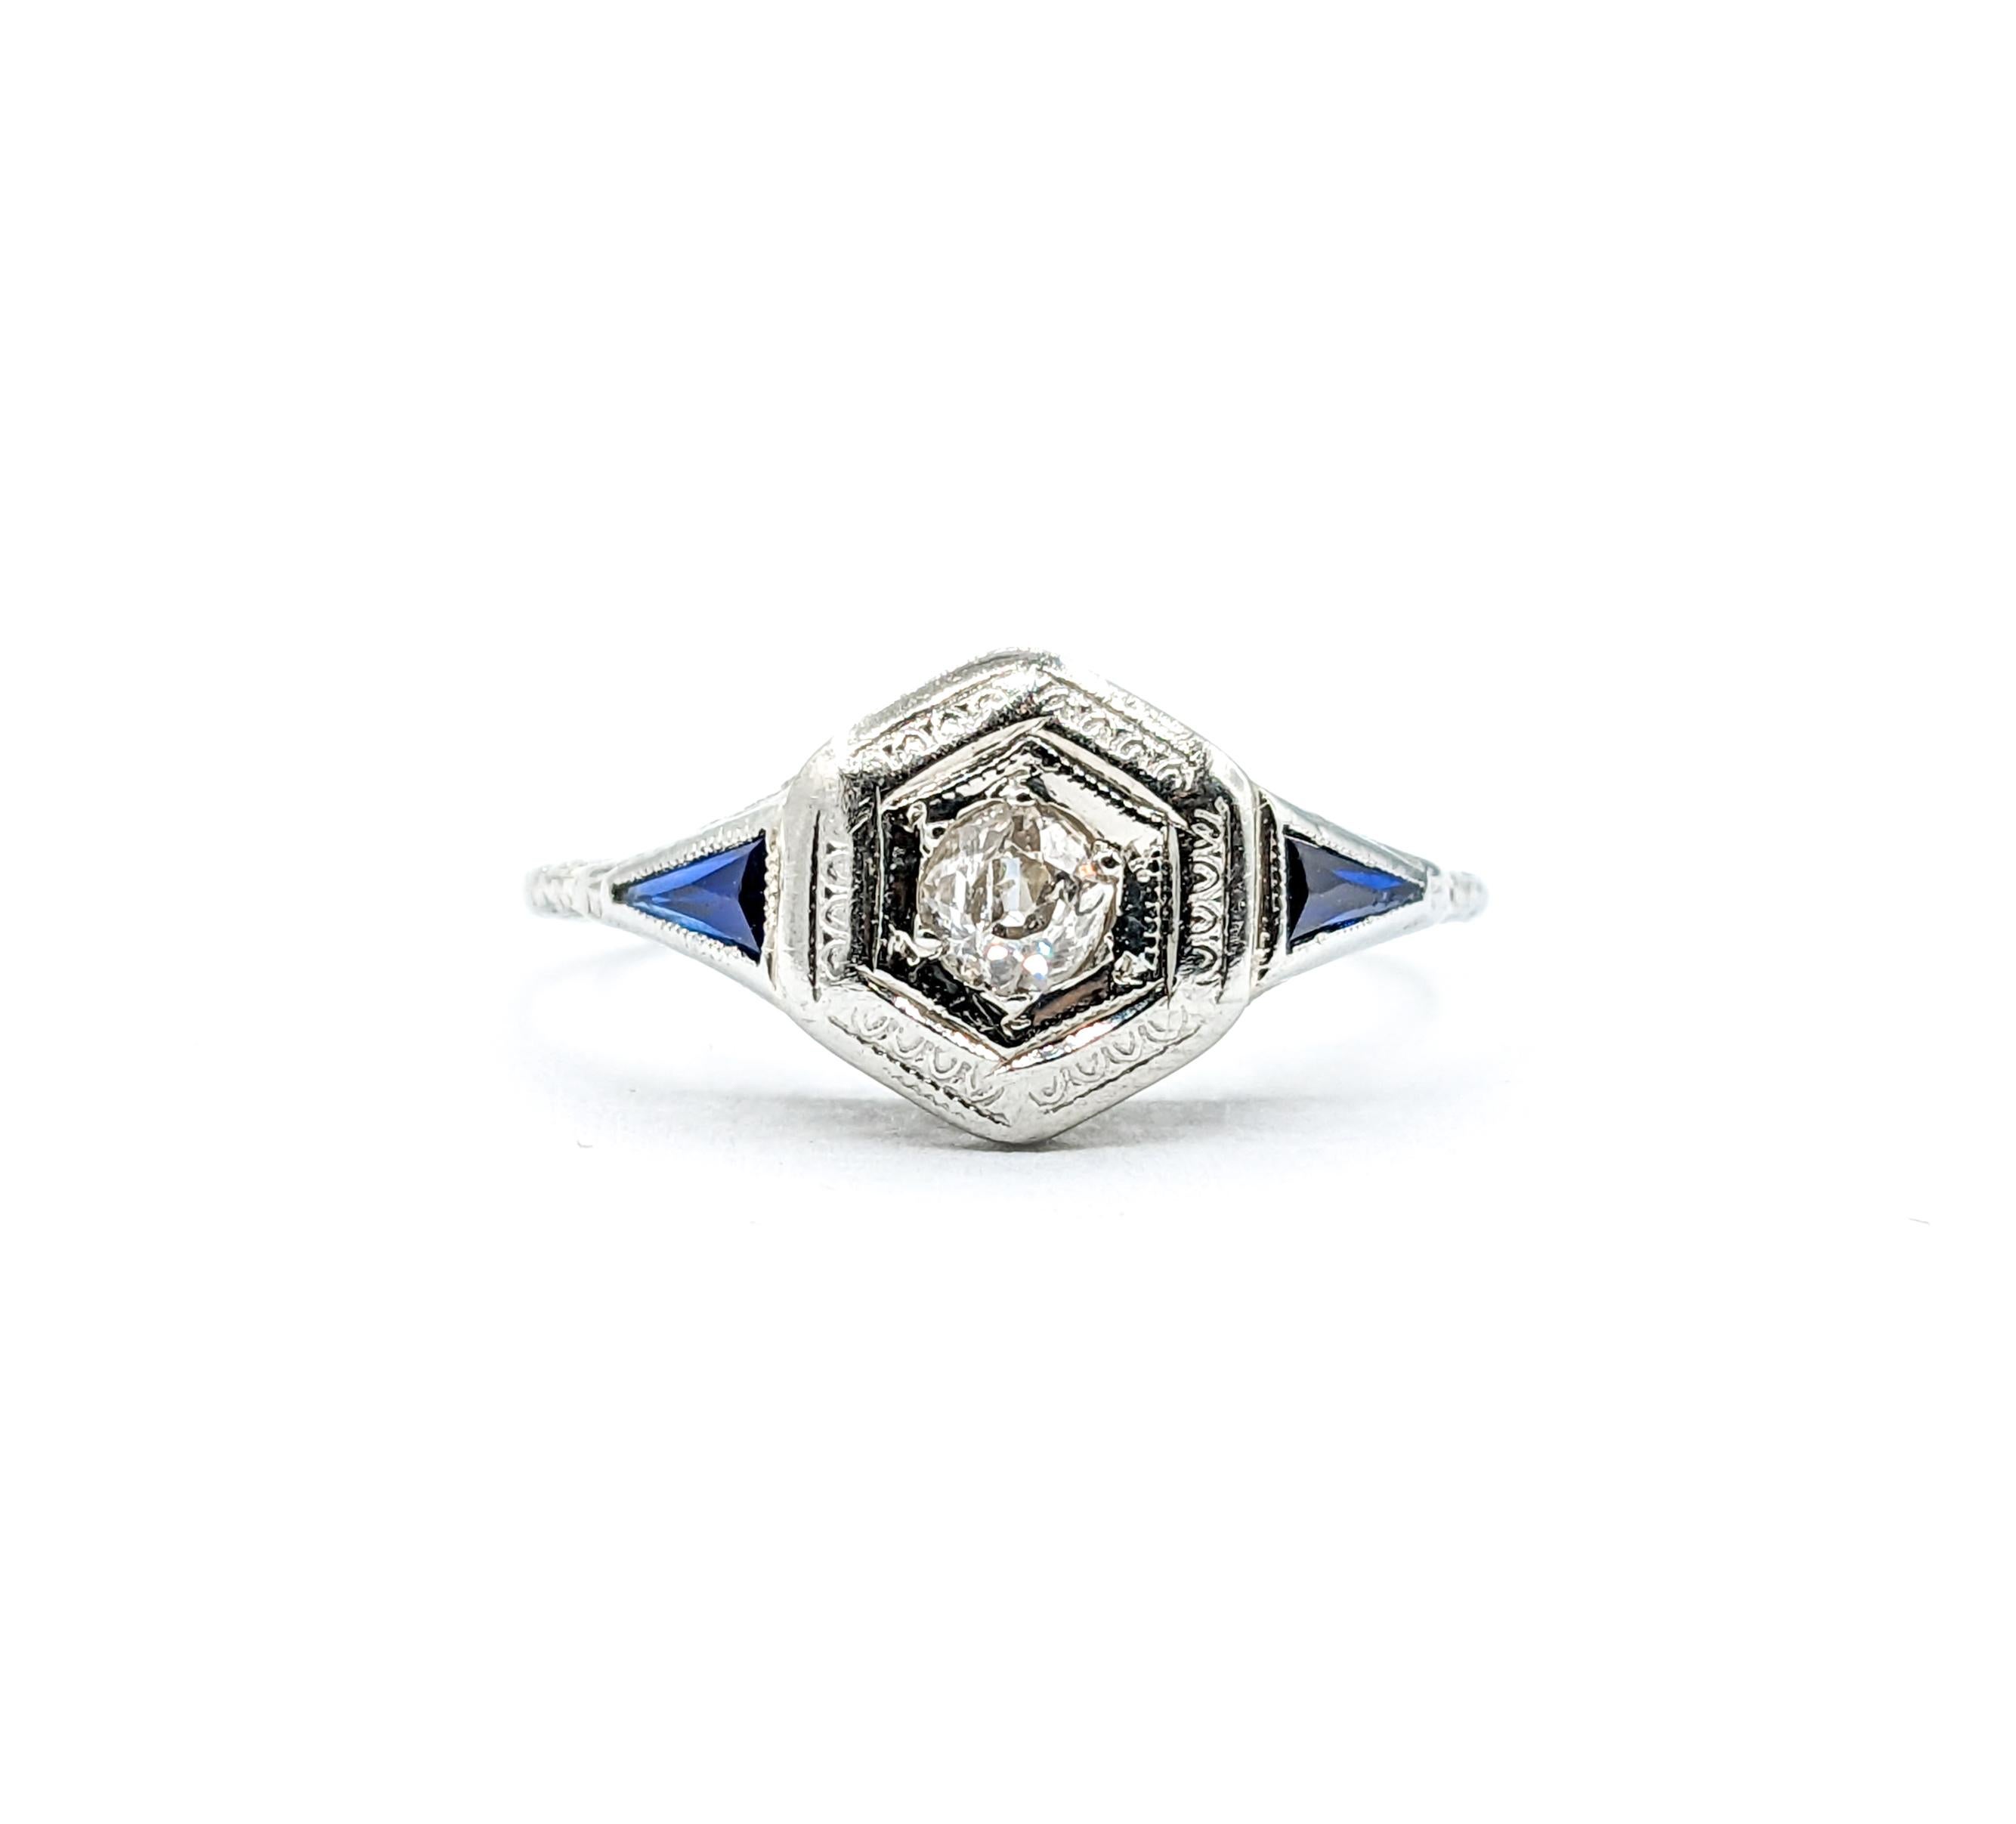 Art Deco Mine Cut Diamond & Sapphire Ring in 18k White Gold

Experience the allure of the past with this exquisite Art Deco ring, skillfully fashioned from 18kt white gold. At its heart lies a .15 carat mine cut diamond, bursting with brilliance and